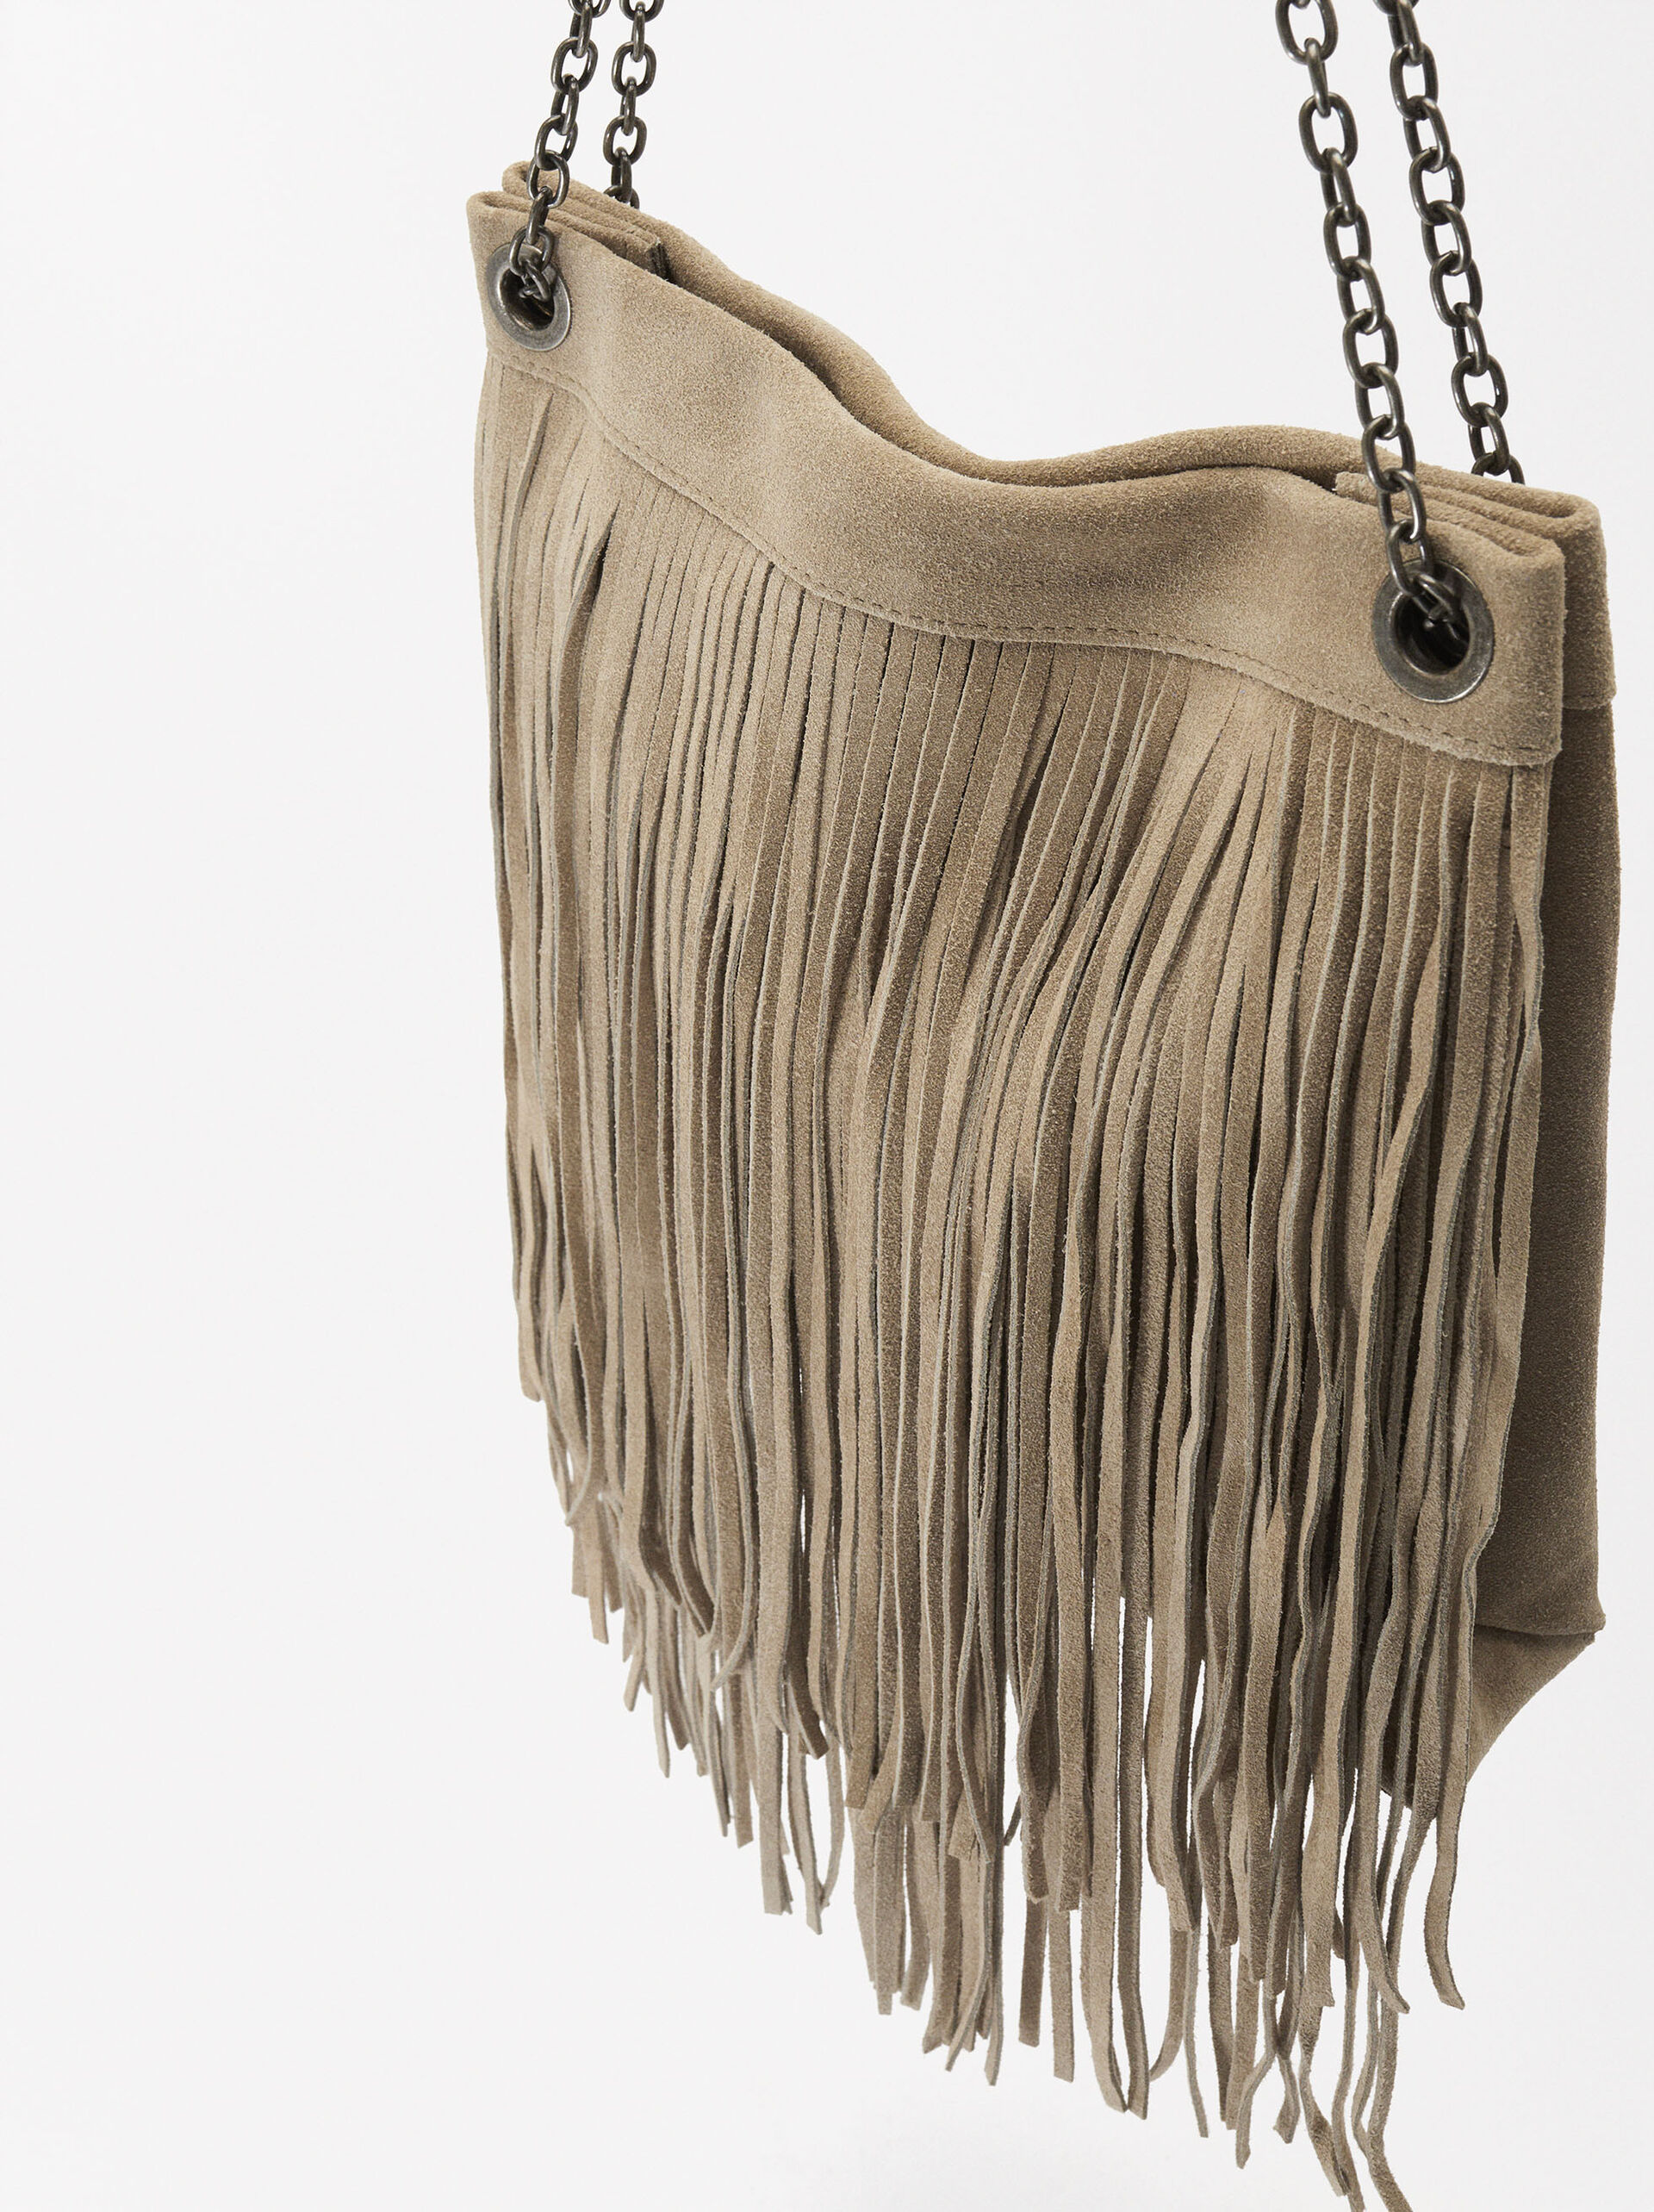 Leather Crossbody Bag With Fringes image number 2.0